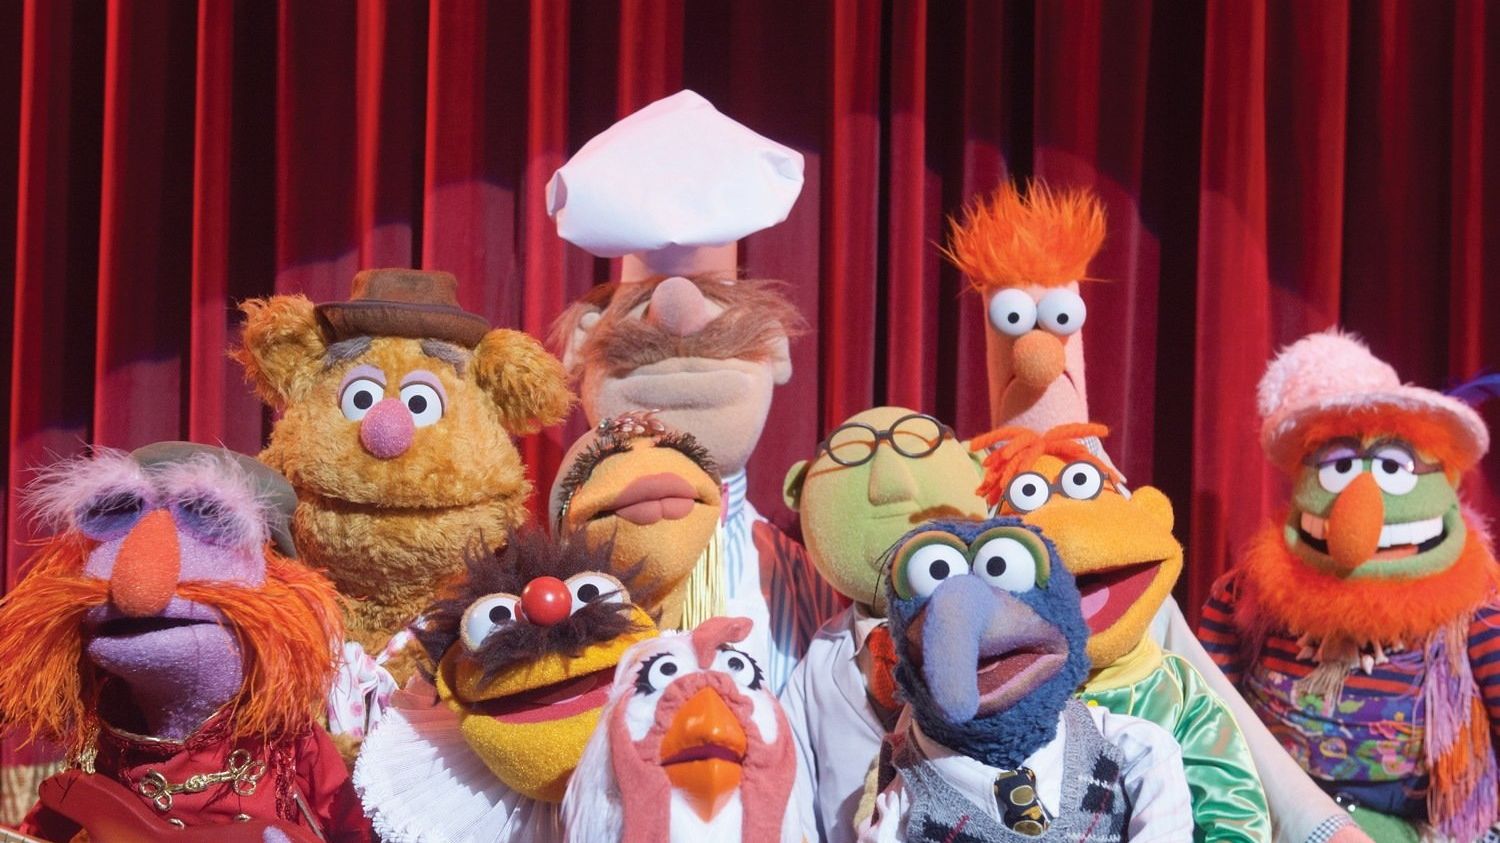 The Muppets head to Europe in 2014's "Muppets Most Wanted."